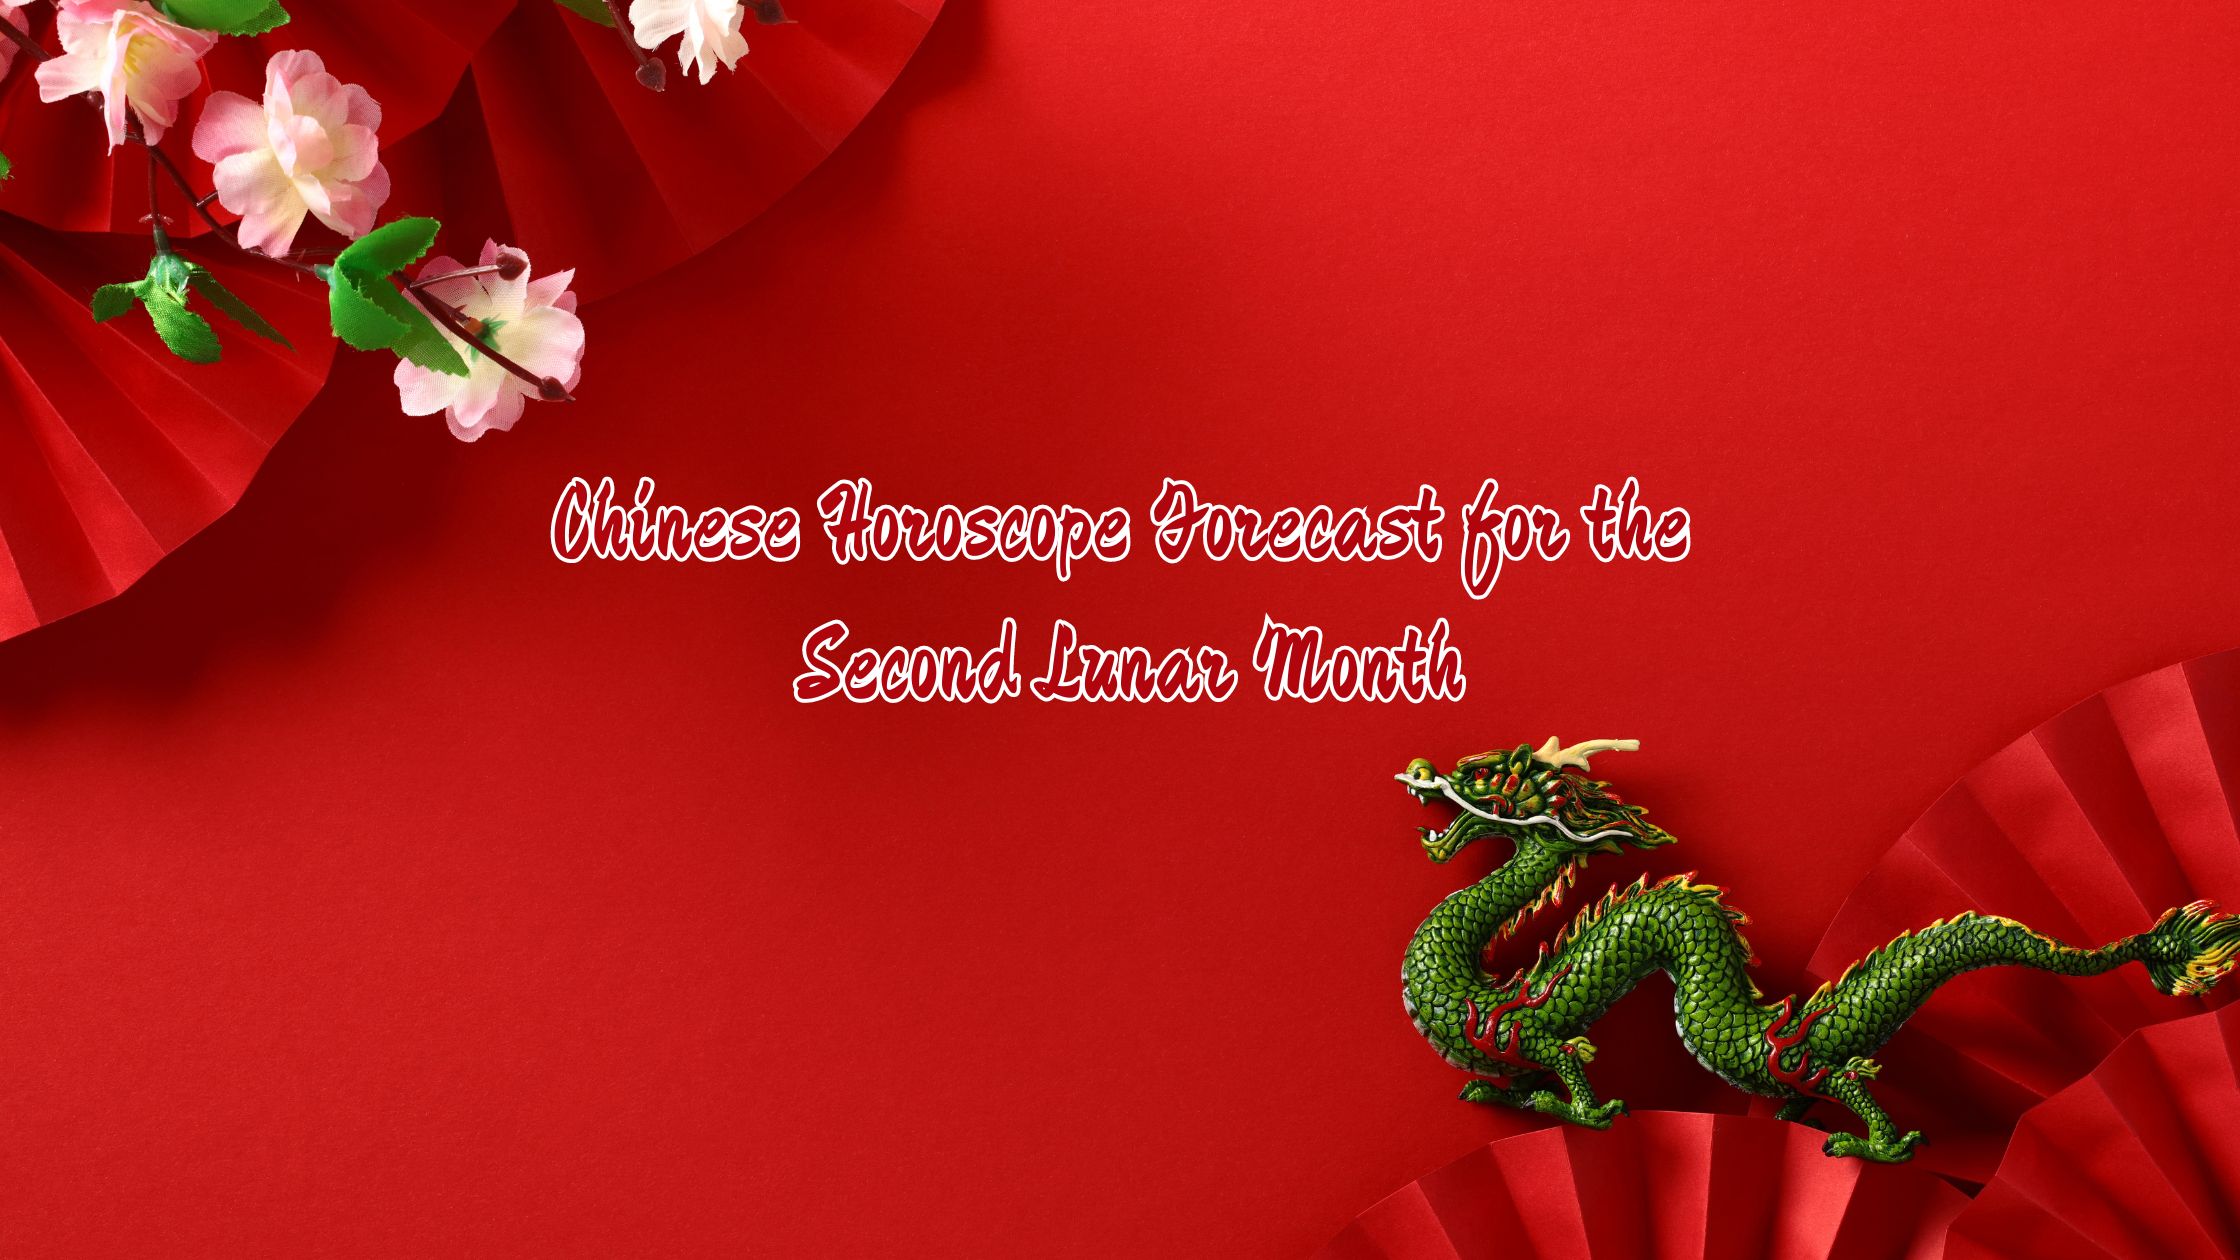 Chinese Horoscope Forecast for the Second Lunar Month